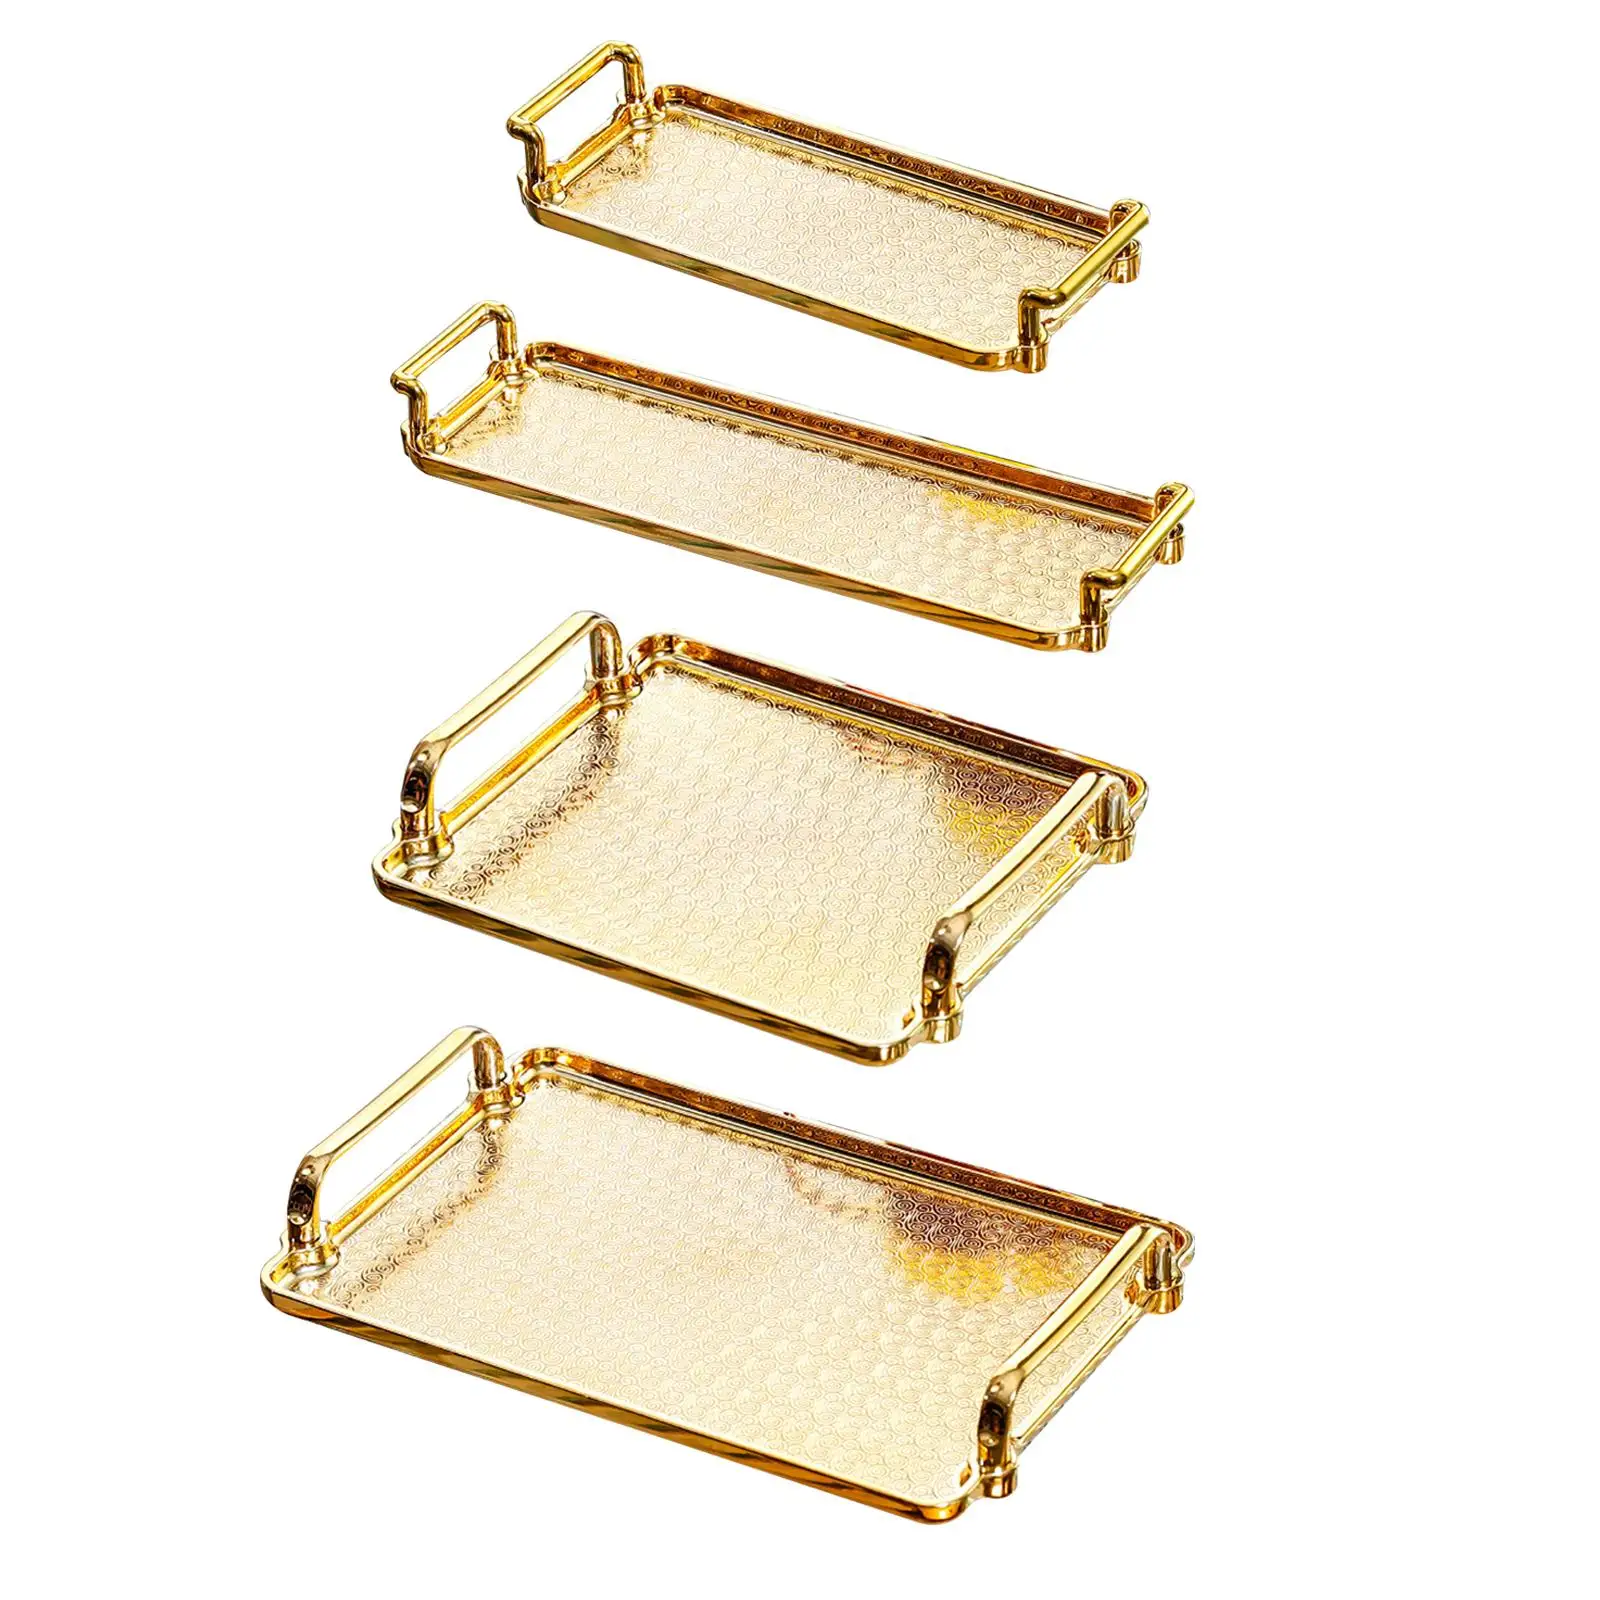 Serving Tray with Handles Rectangle Plating for Party Living Room Organizer